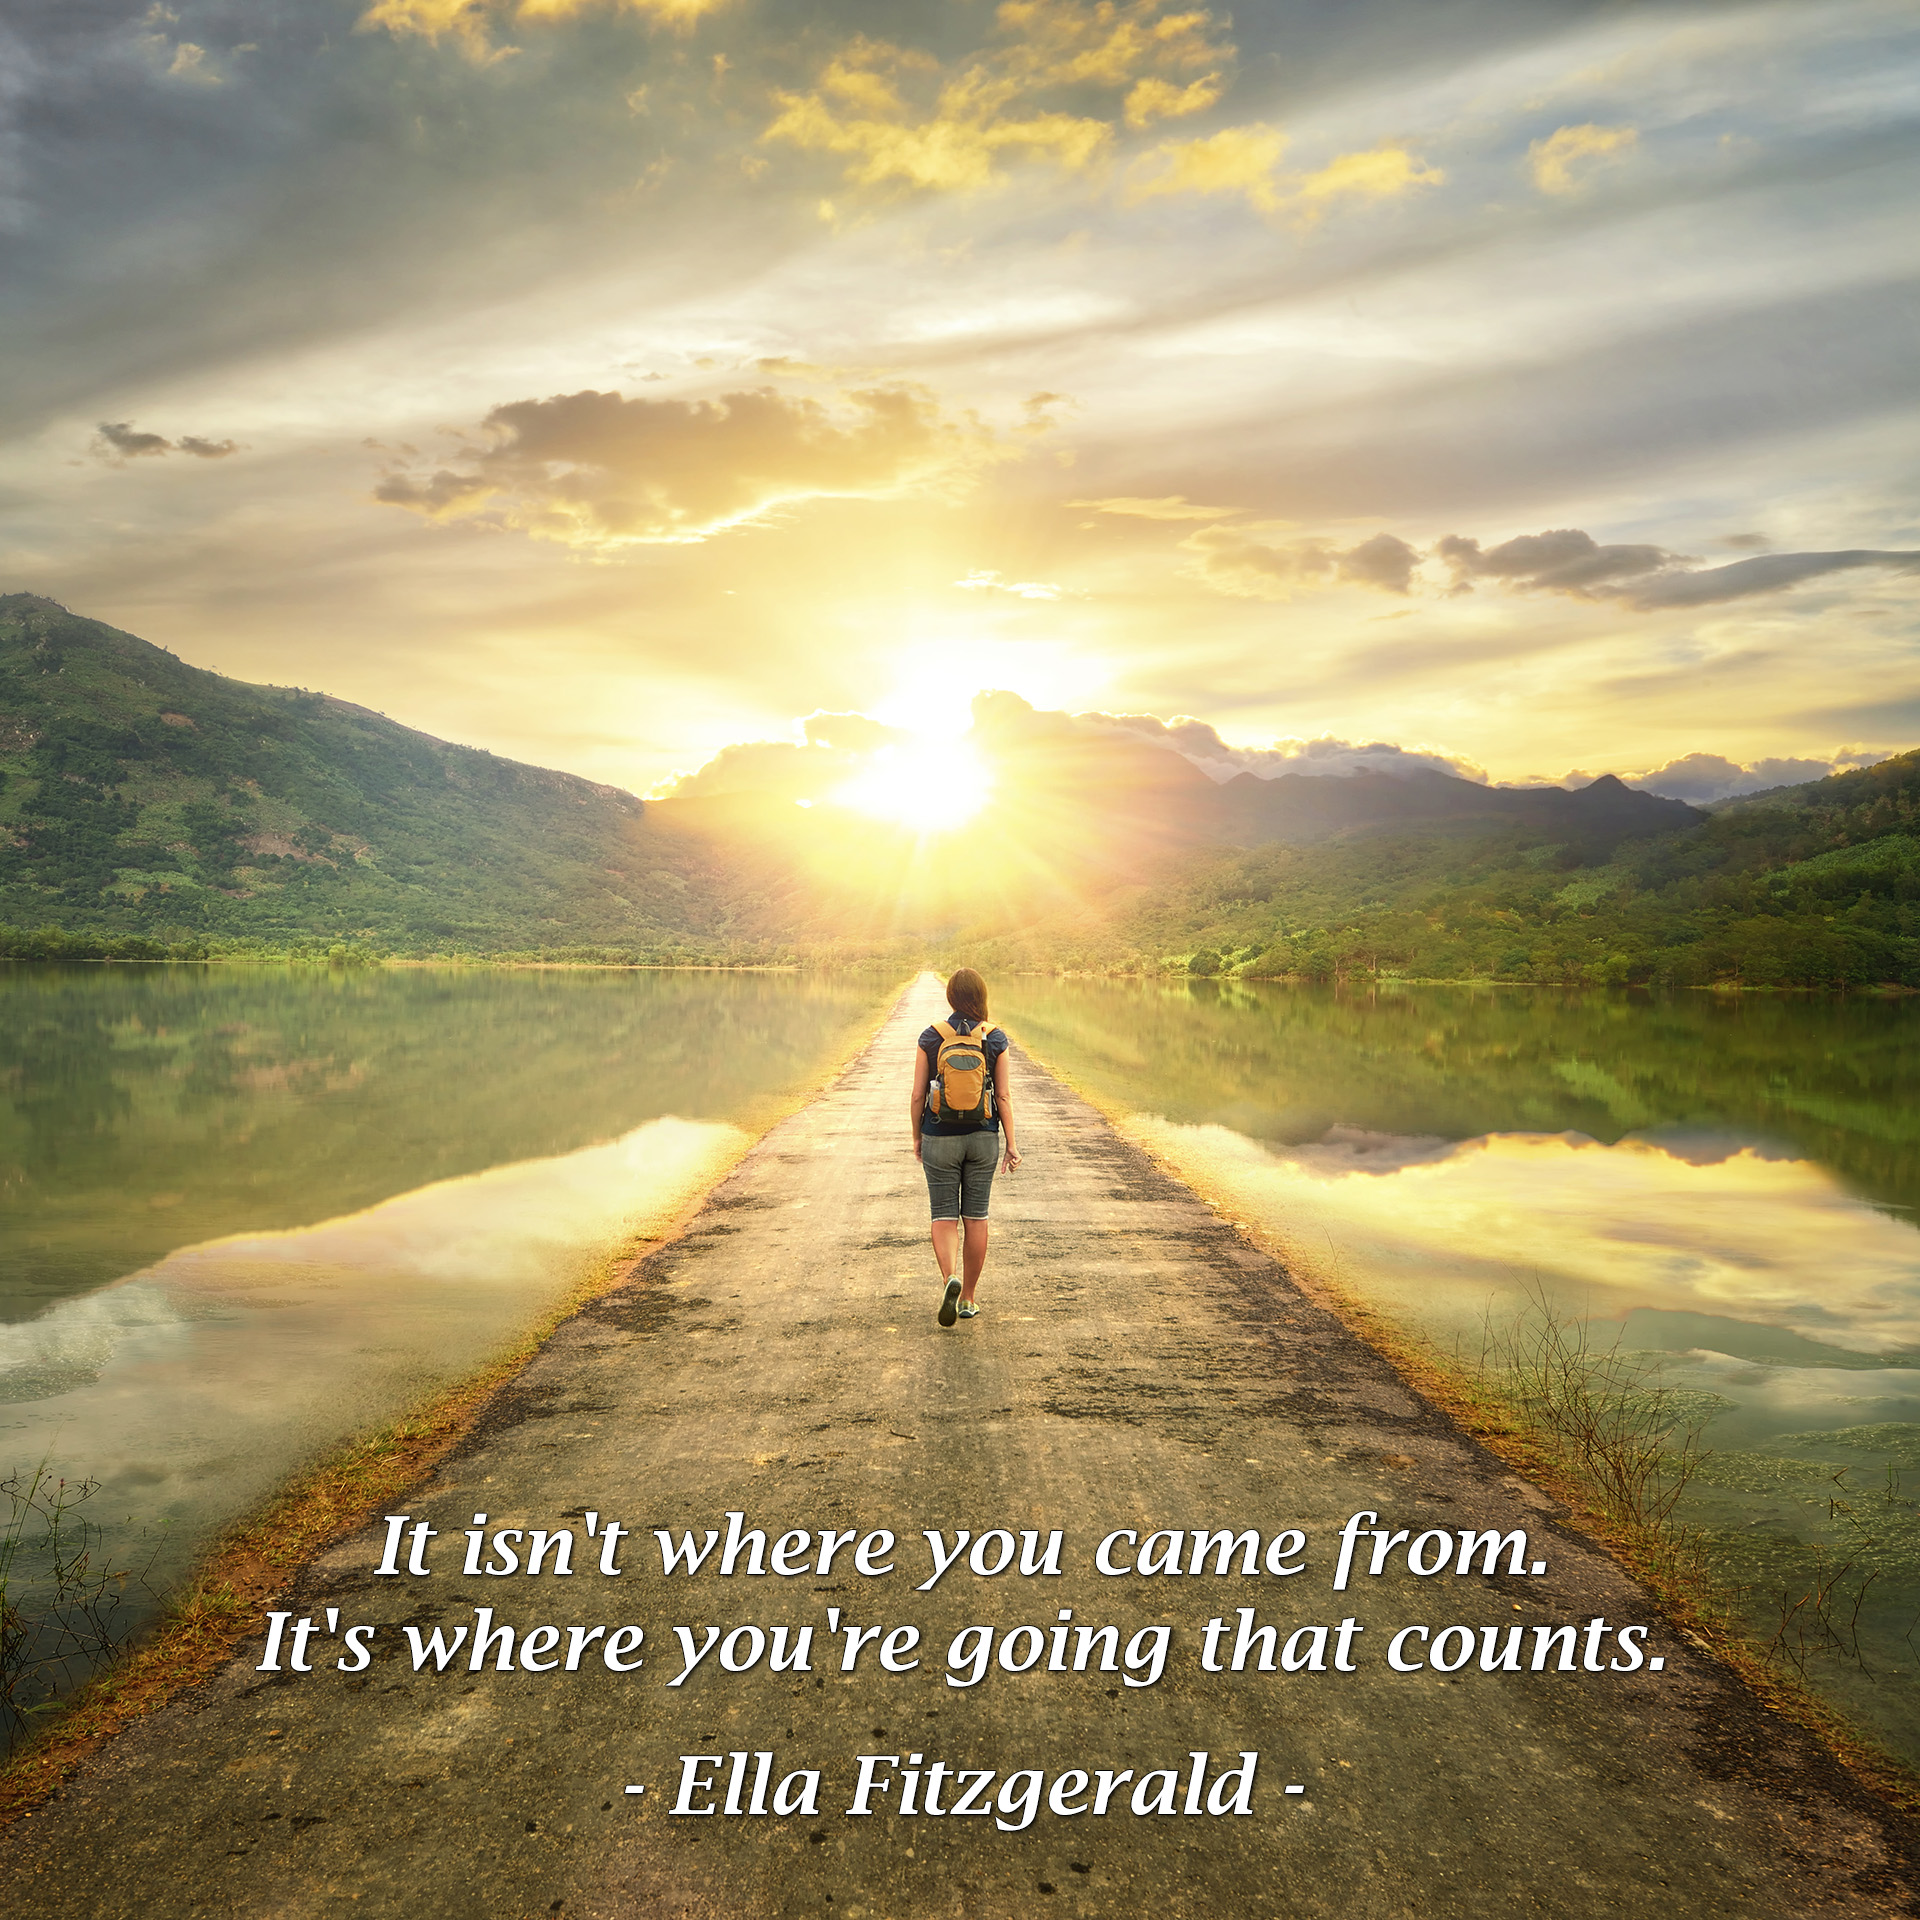 It isn't where you came from. It's where you're going that counts. - Ella Fitzgerald